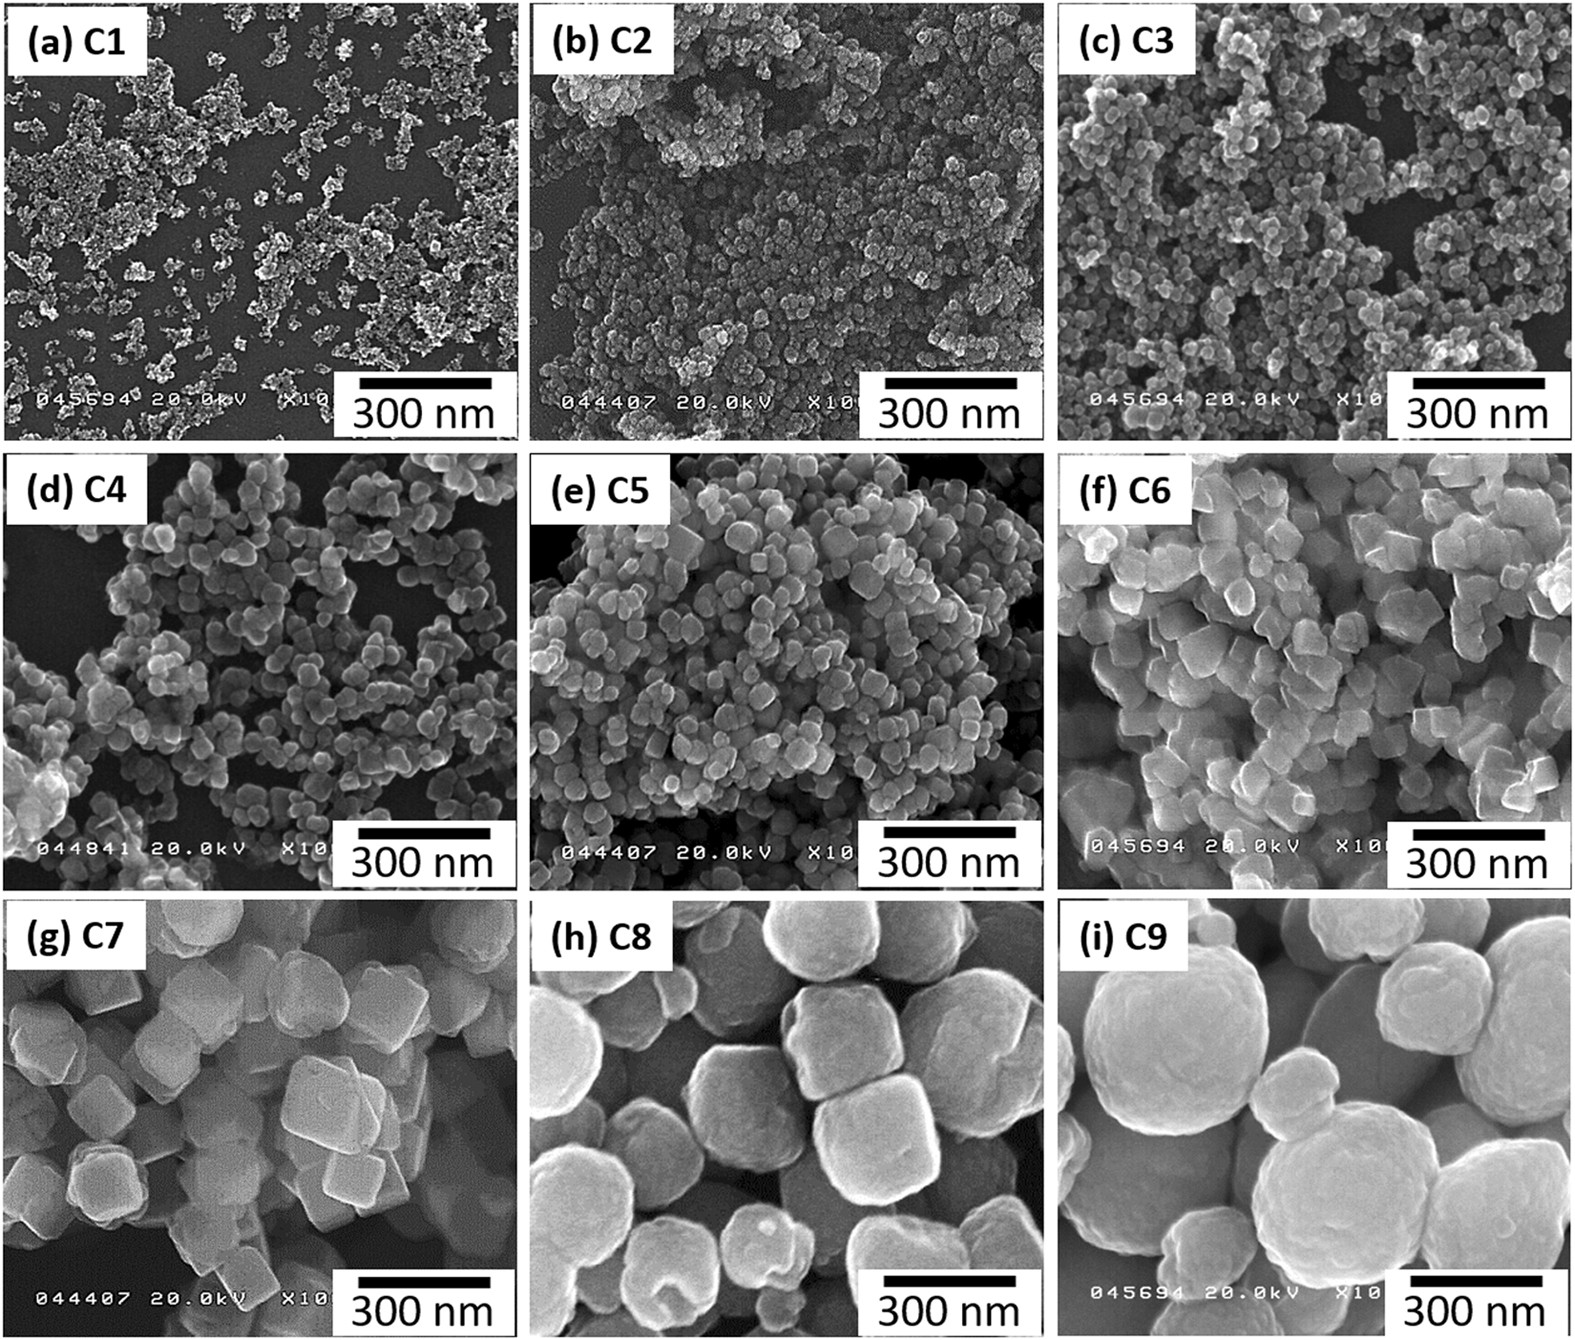 Correlation between particle size/domain structure and magnetic properties  of highly crystalline Fe3O4 nanoparticles | Scientific Reports